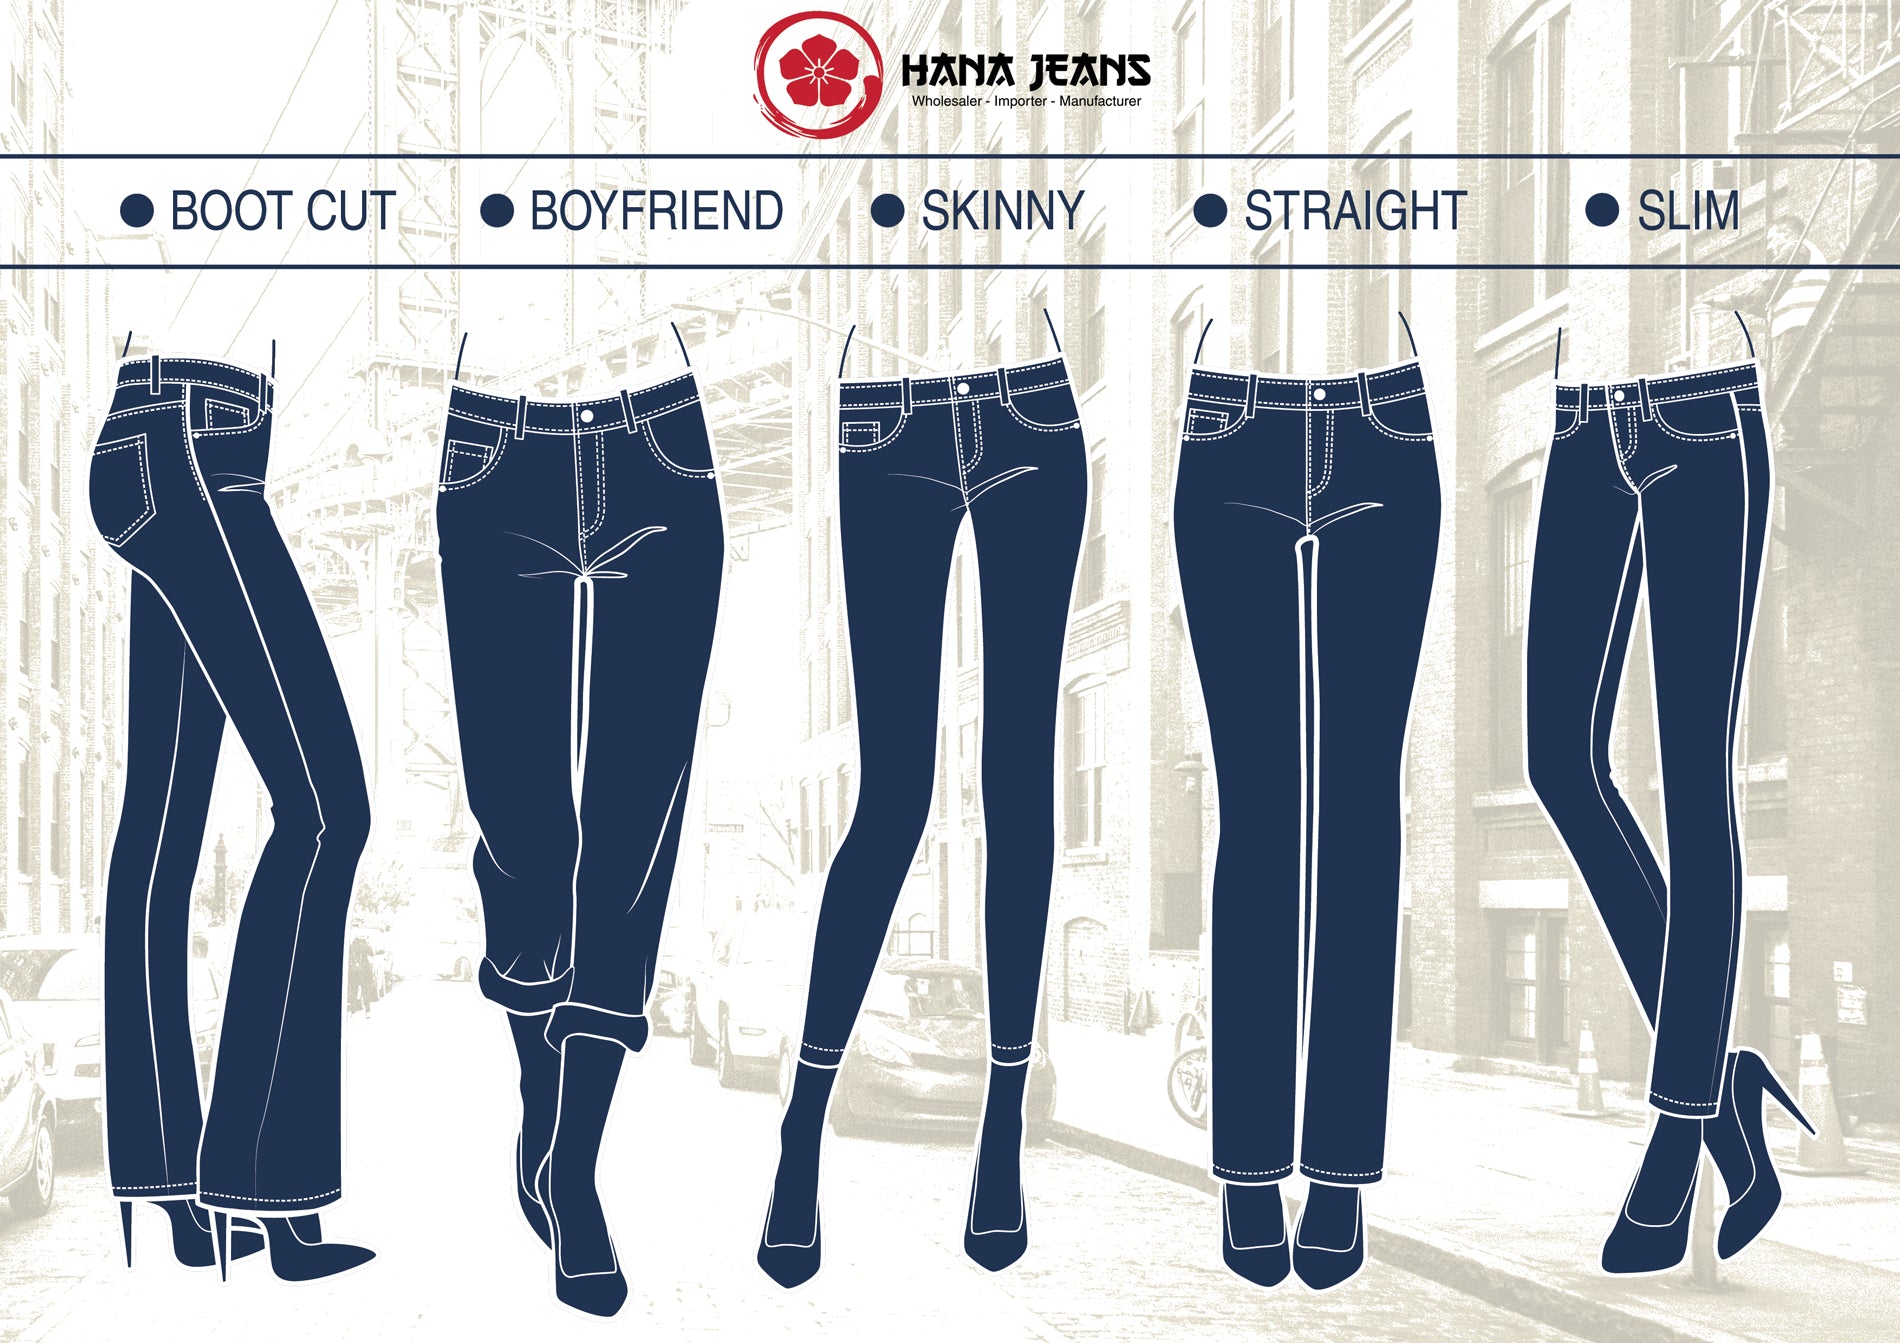 Difference in “cuts” and styles of Denim Jeans